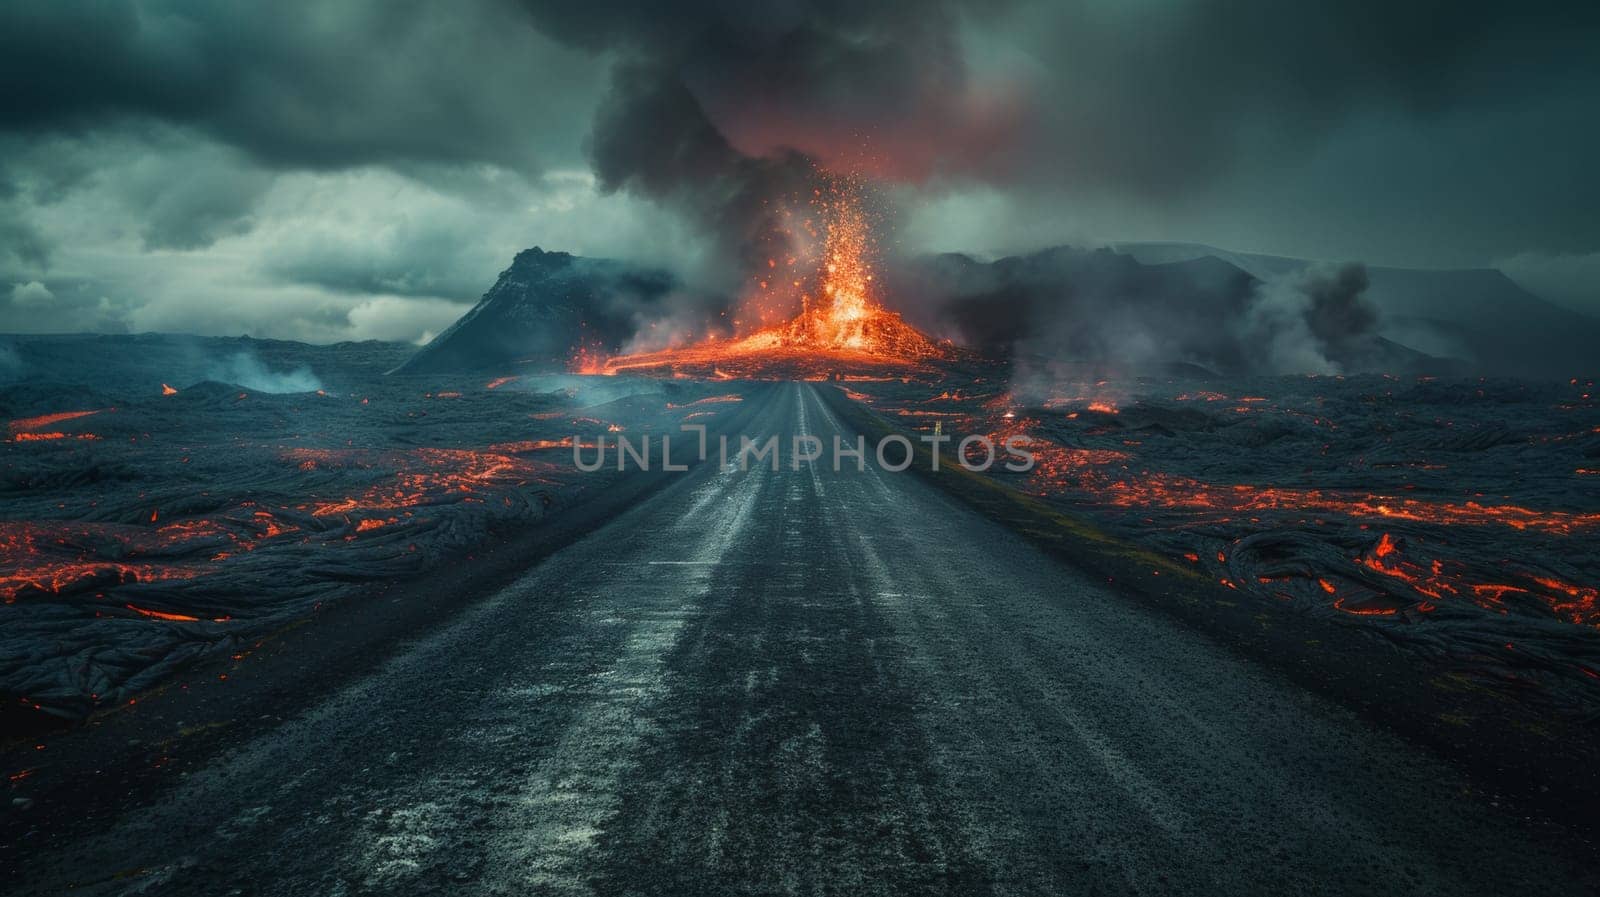 A road leading to a volcano with lava spewing out of it